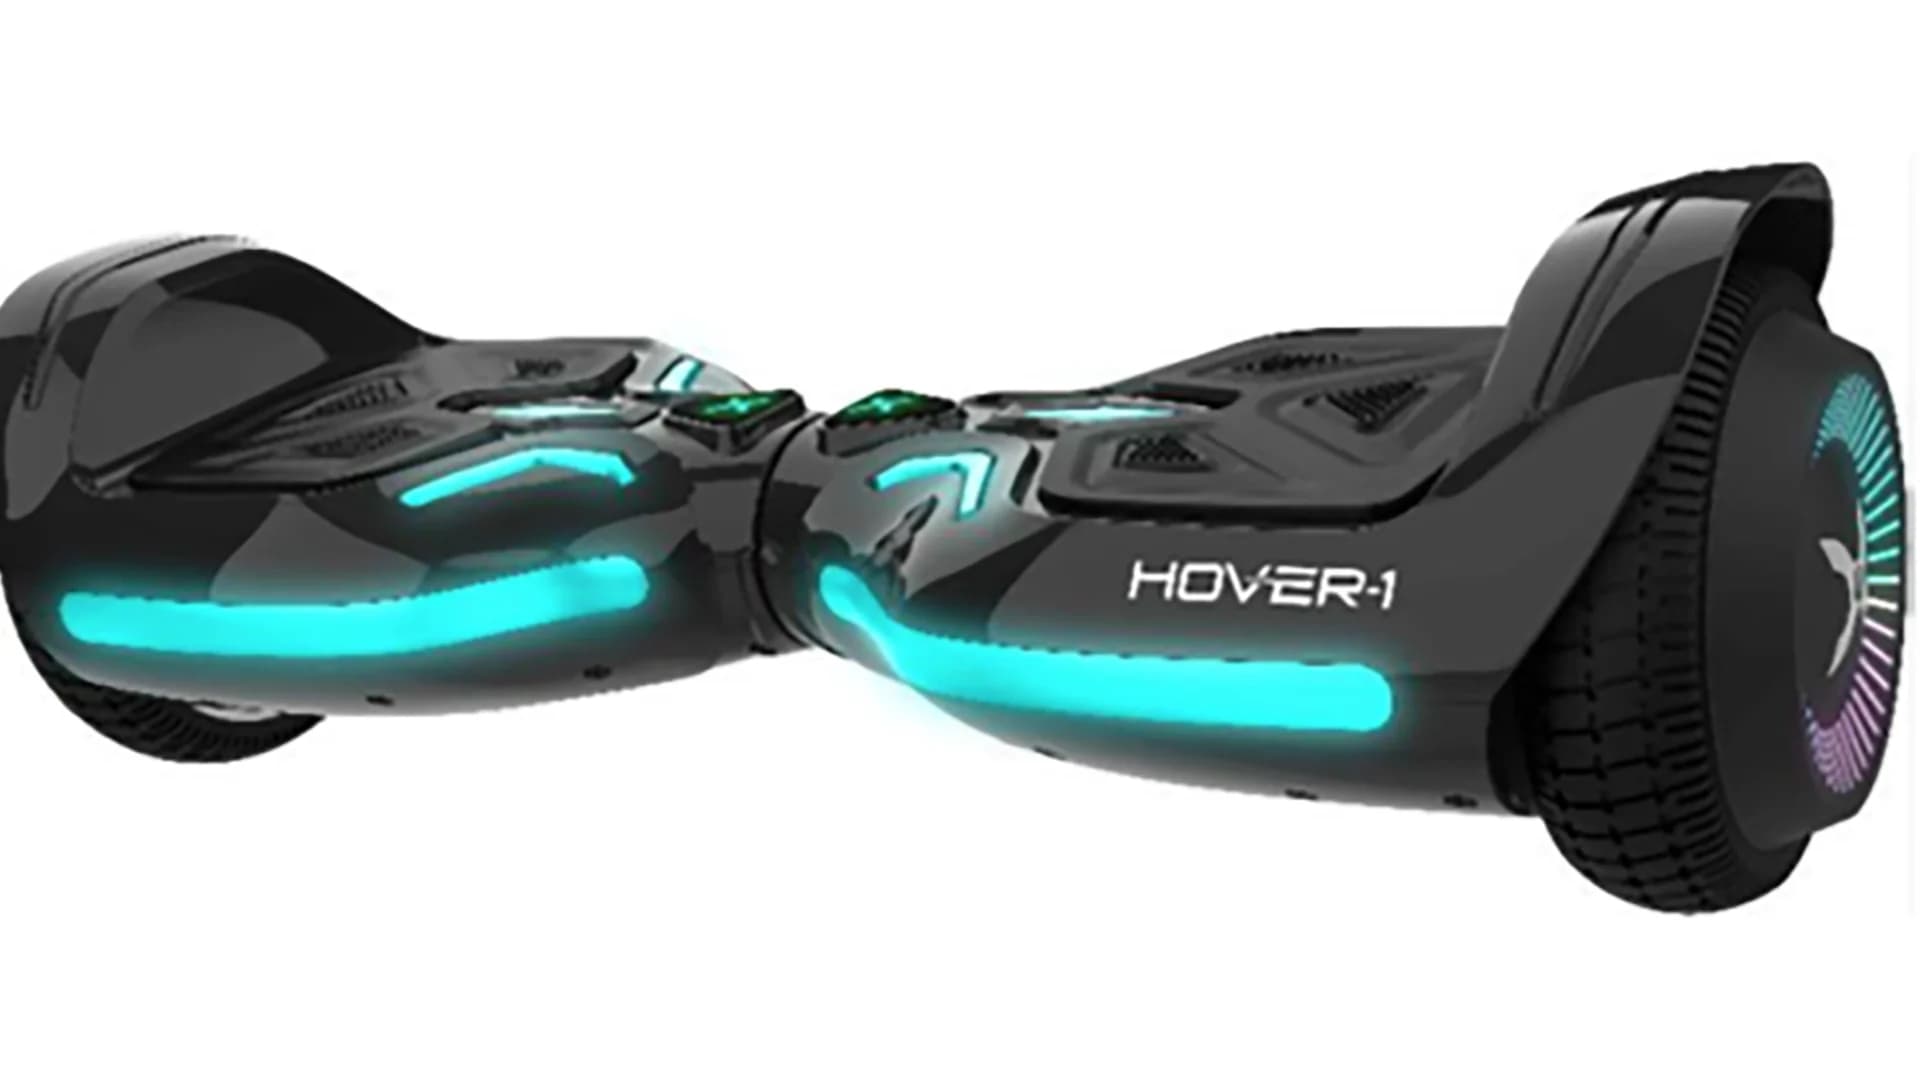 Company recalls 93,000 hoverboards due to malfunction that can hurt riders